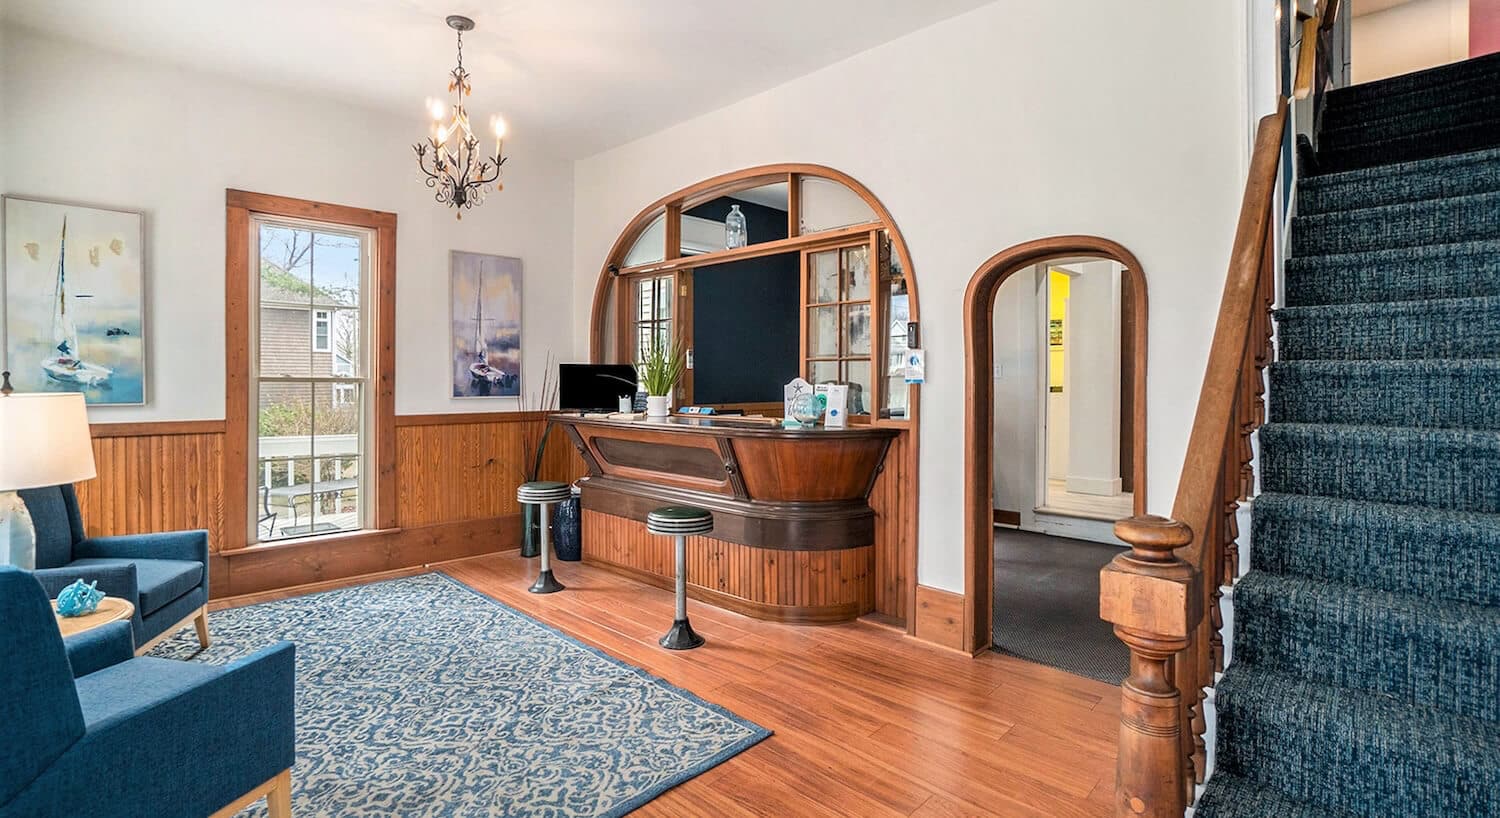 A sitting room with wood floors, white walls and wood wainscotting, an antique bar and barstools along one wall, and a sitting area with blue wingback chairs on the opposite wall, and stairs with blue carpeting leading upstairs.